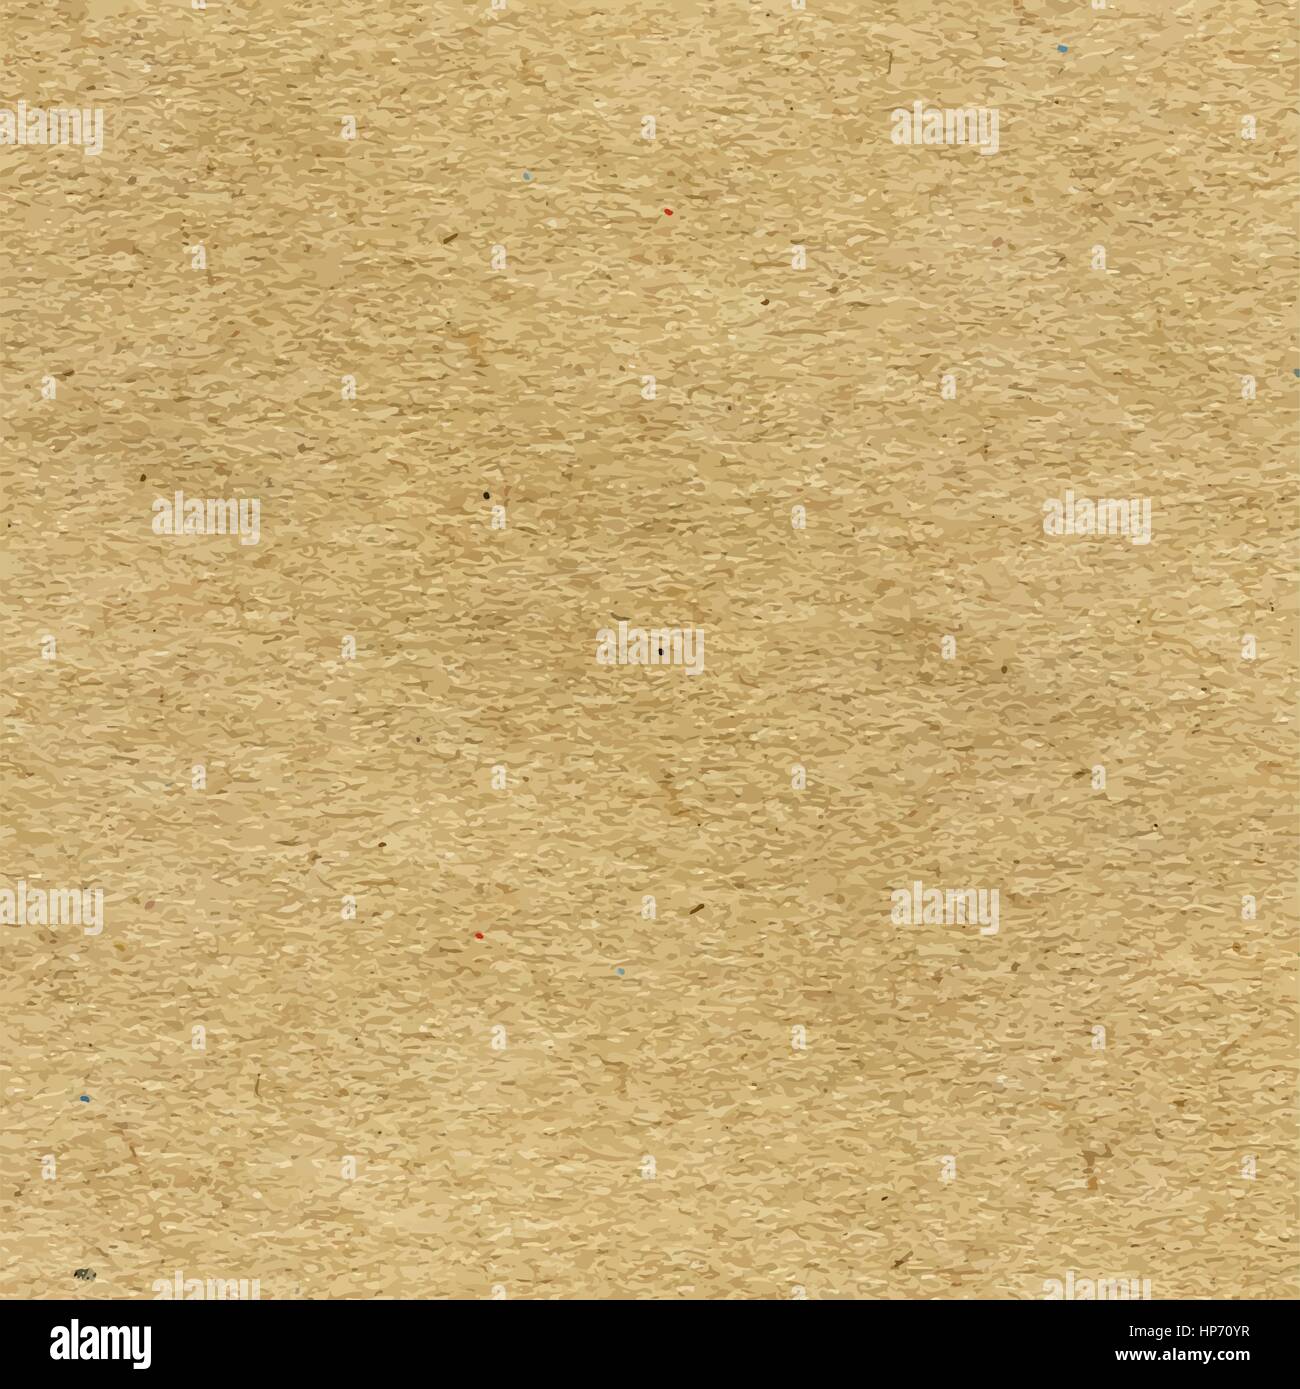 Recycled paper texture stock image. Image of close, filaments - 17772195